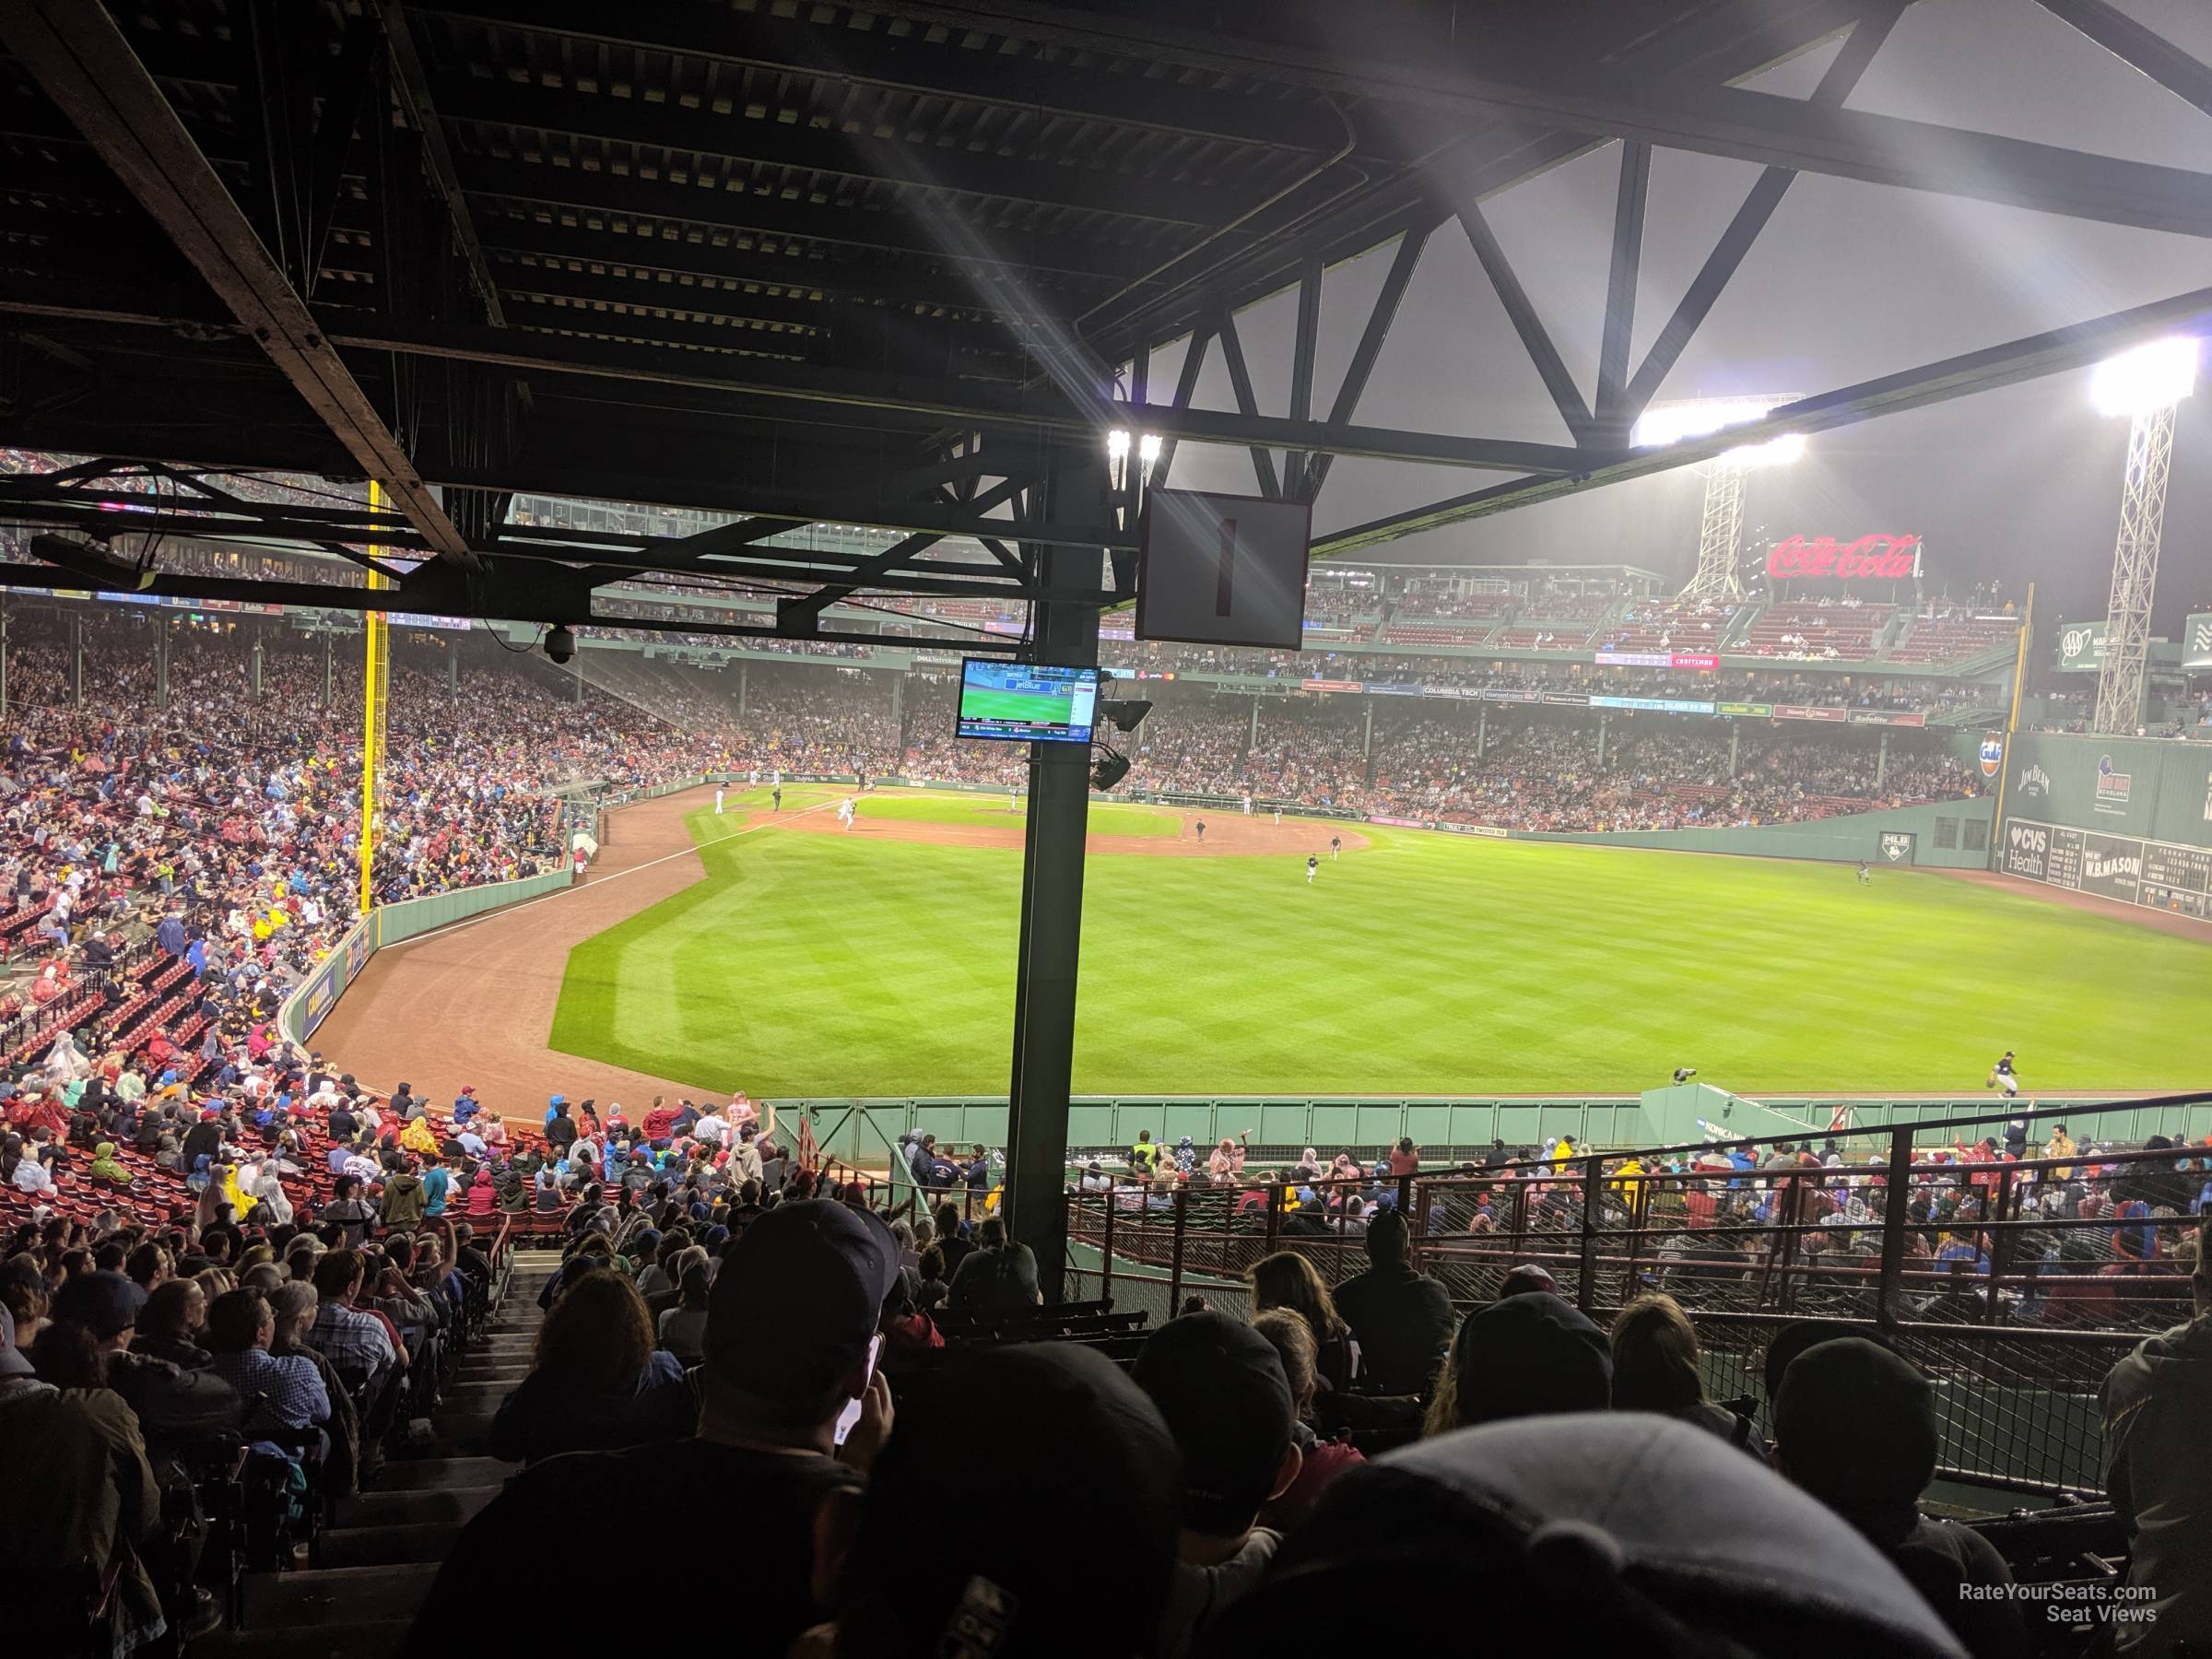 grandstand 1, row 18 seat view  for baseball - fenway park